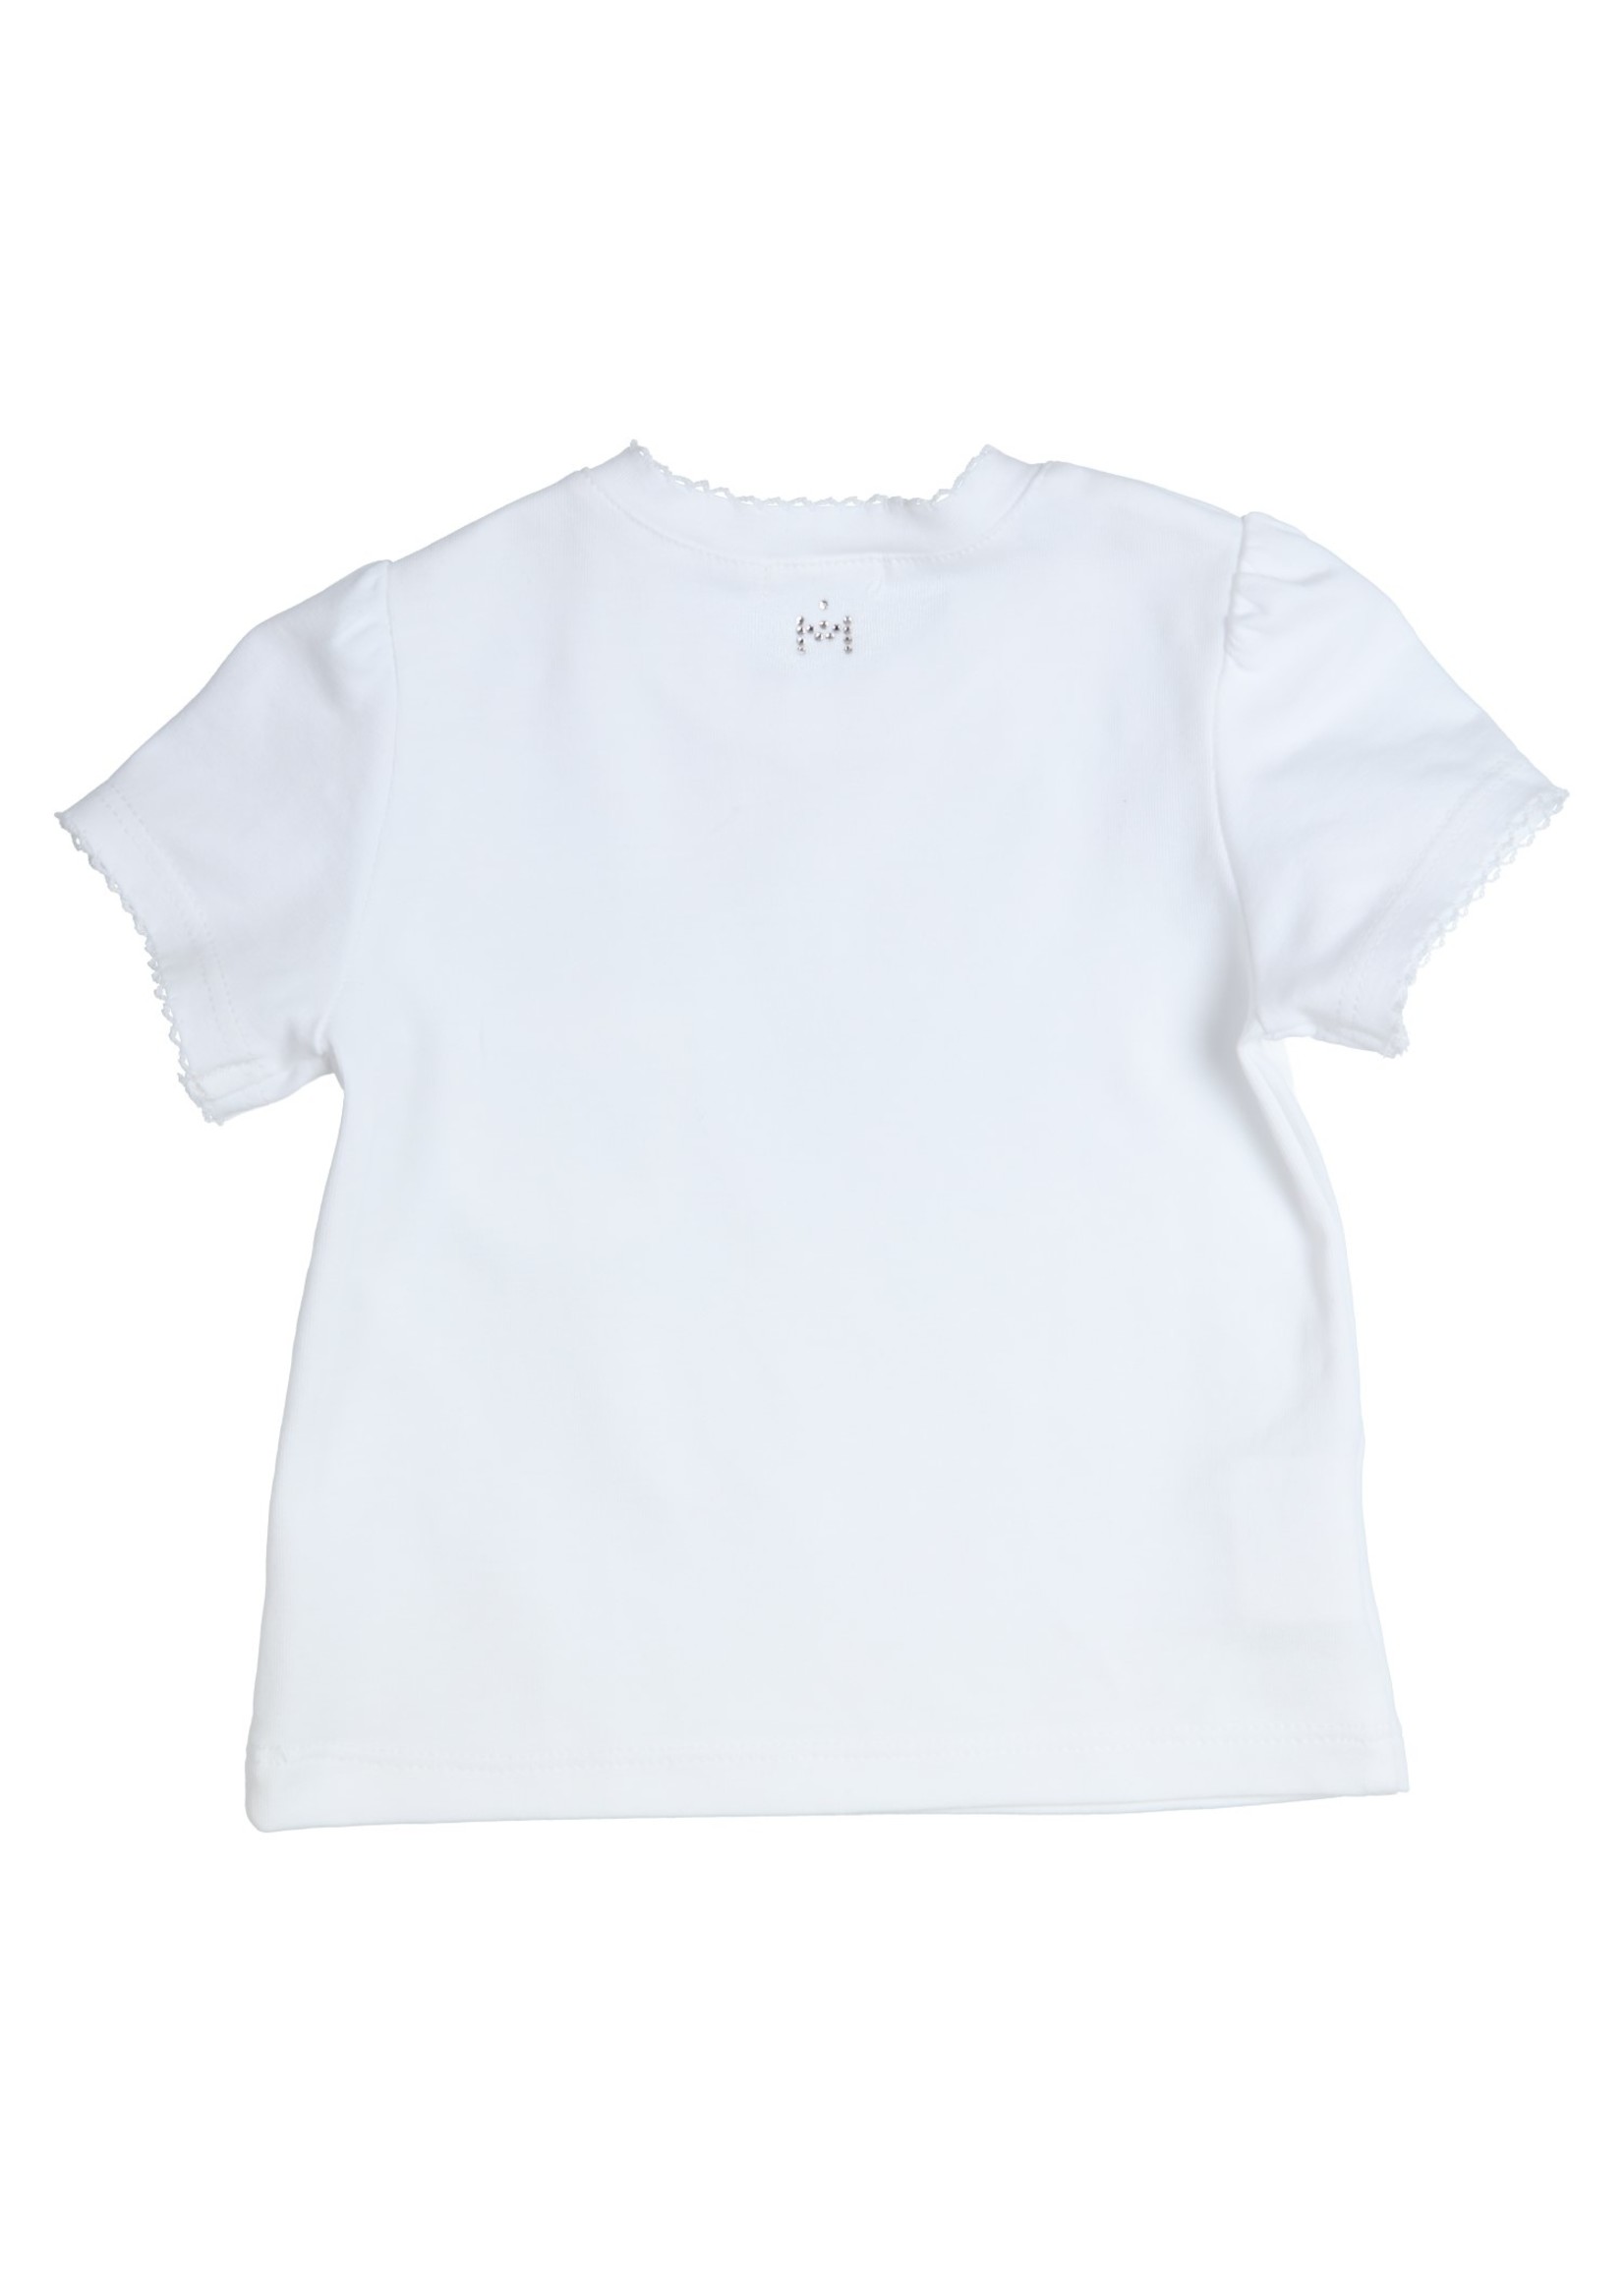 Gymp T-SHIRT - POCKET AND BOW - AER WIT